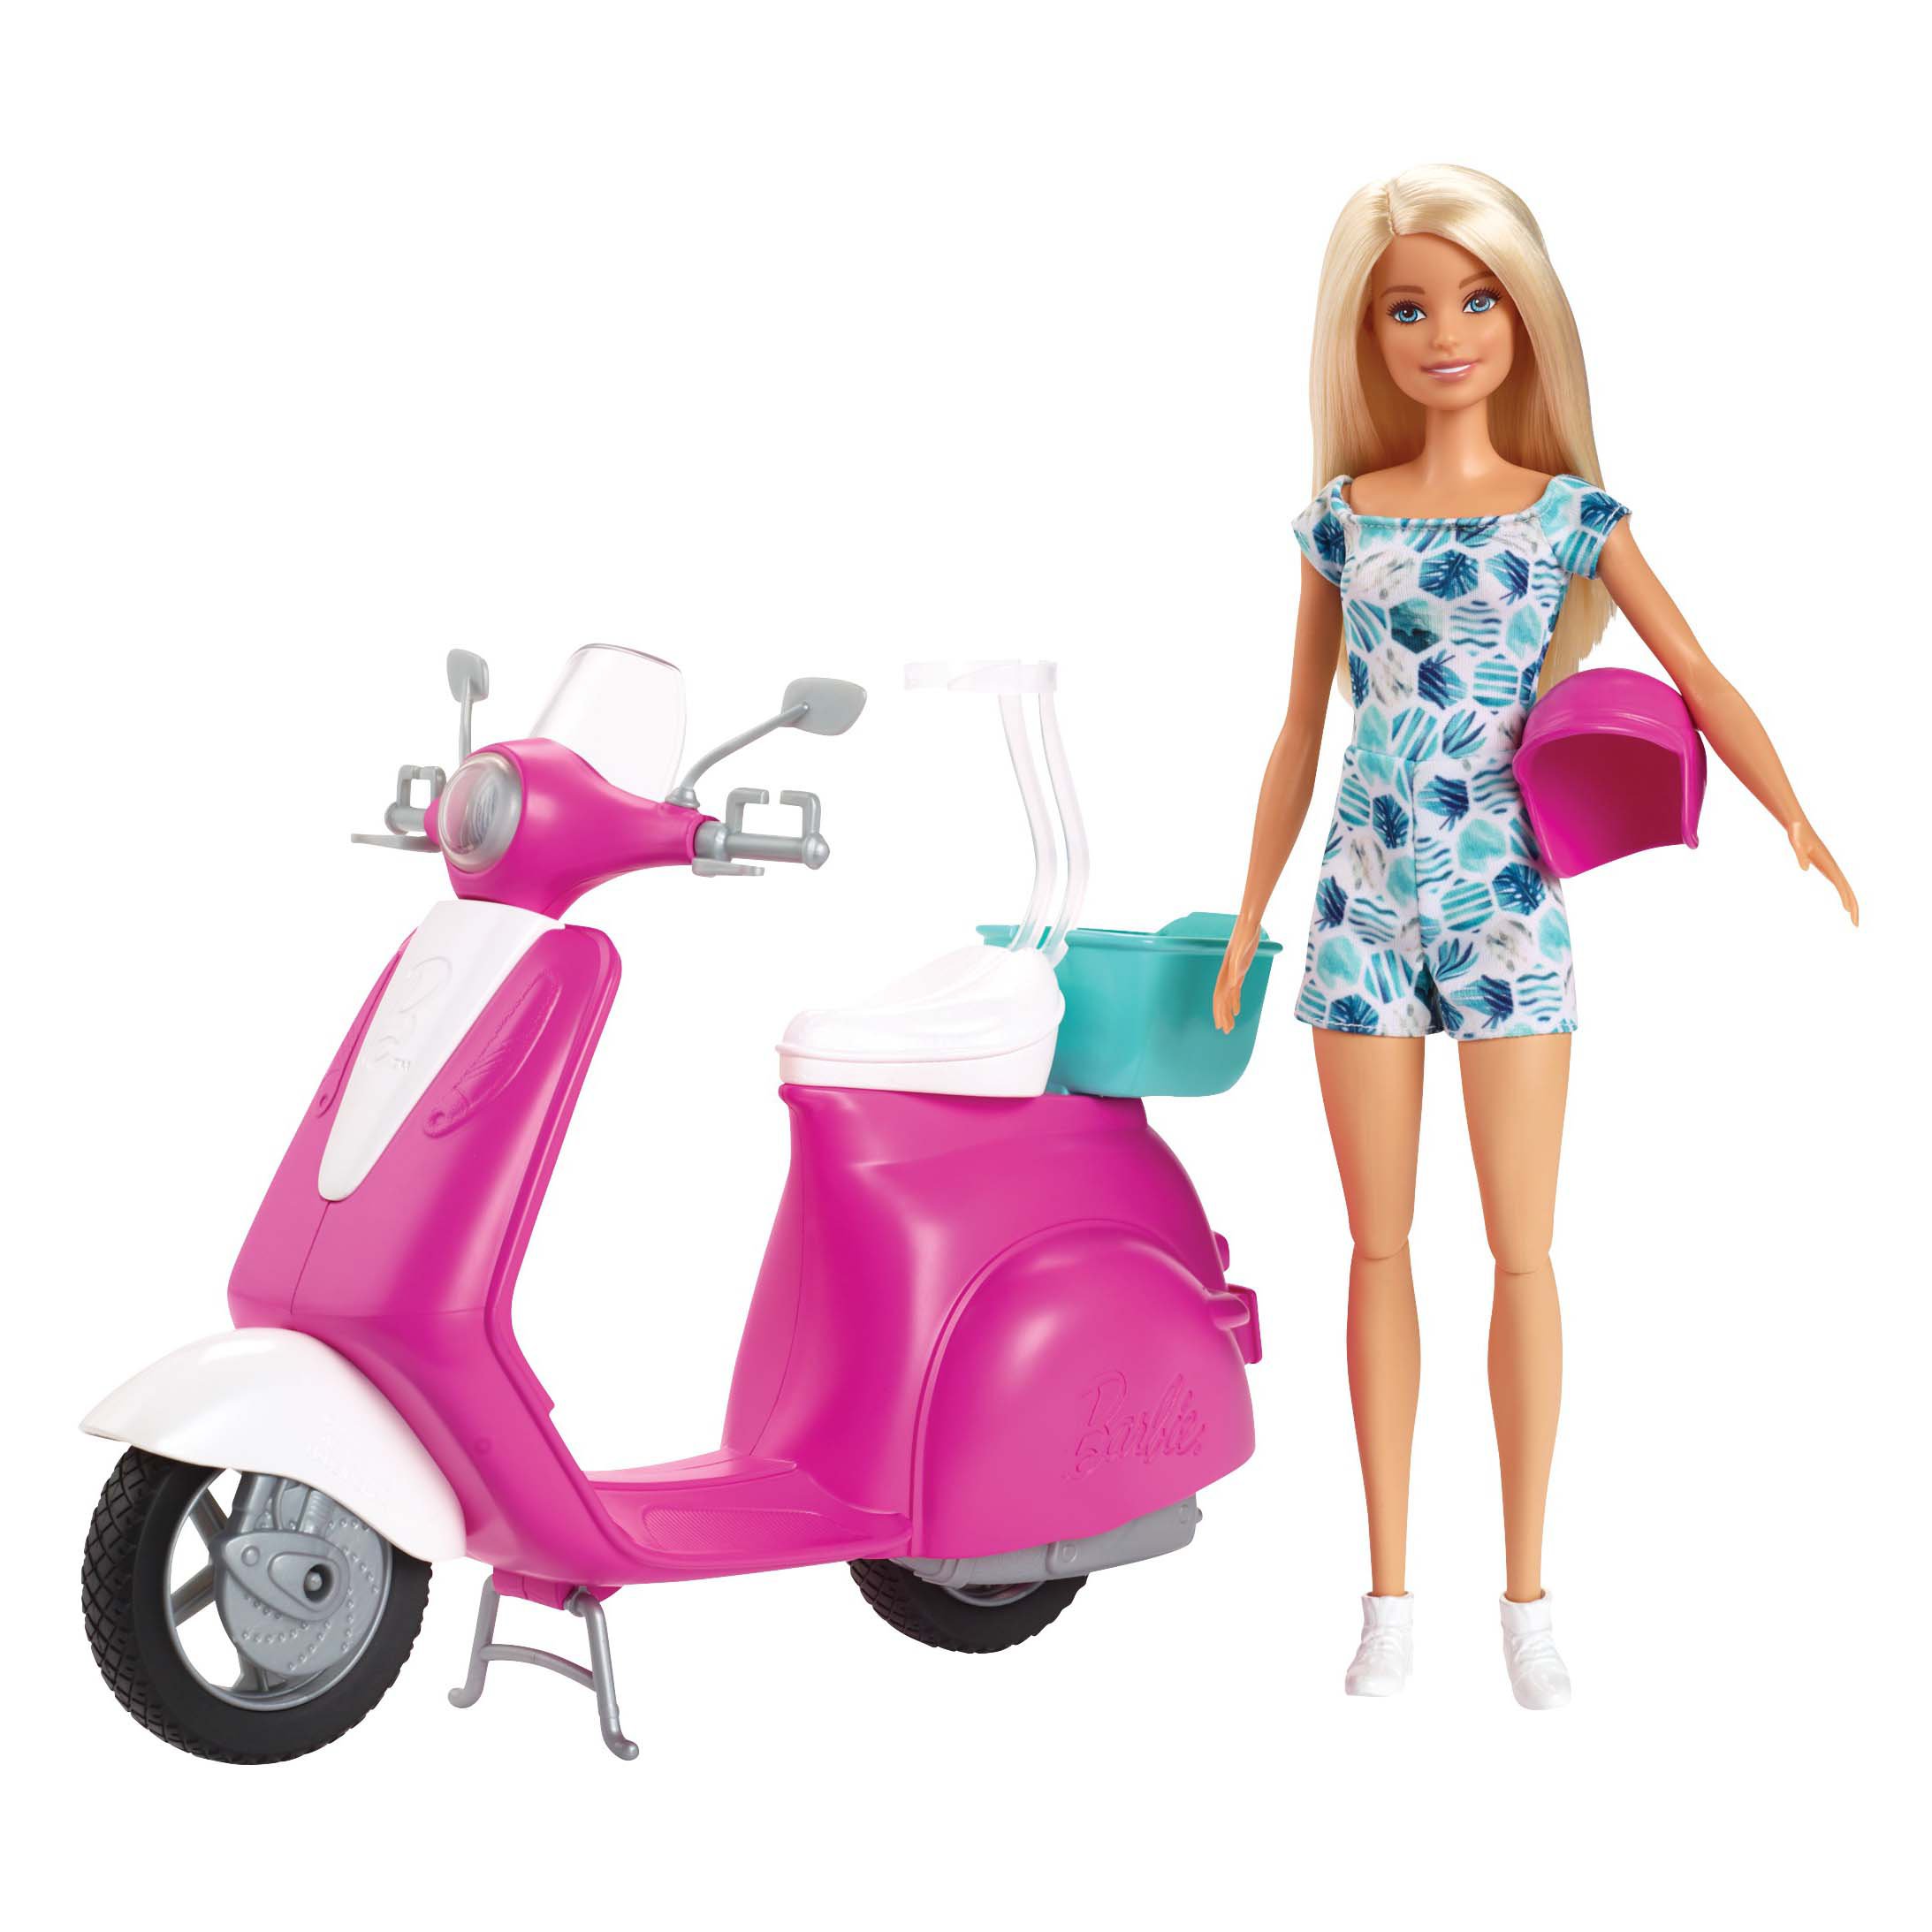 Løb Ballade velstand Barbie Fashion Doll & Scooter Playset - Shop Action Figures & Dolls at H-E-B